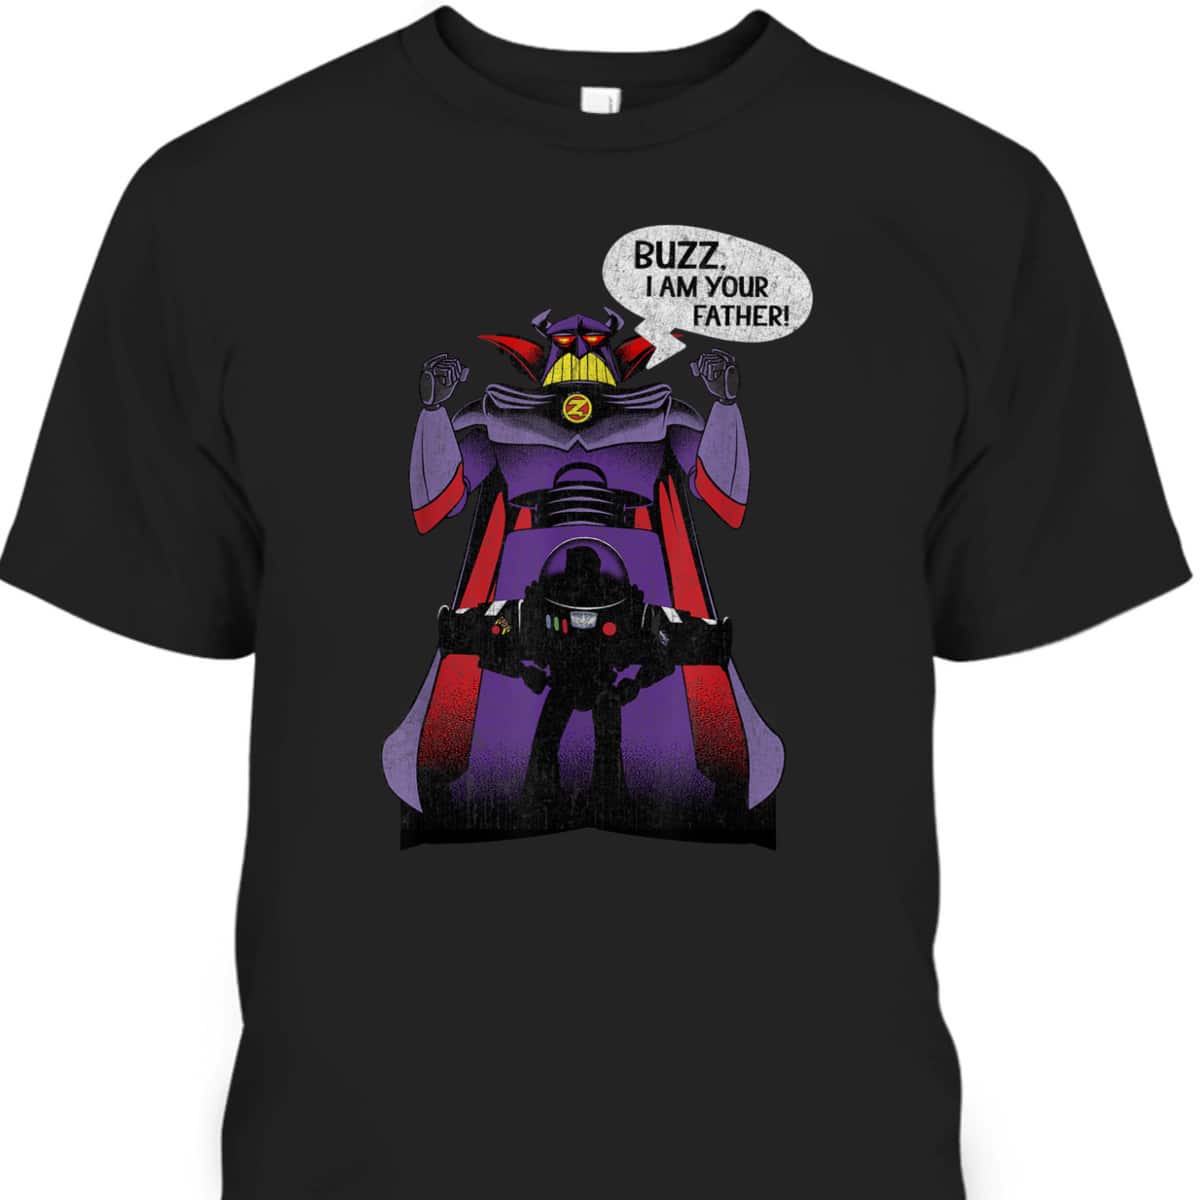 Father's Day T-Shirt Toy Story Zurg Buzz, I Am Your Father Gift For Disney Lovers